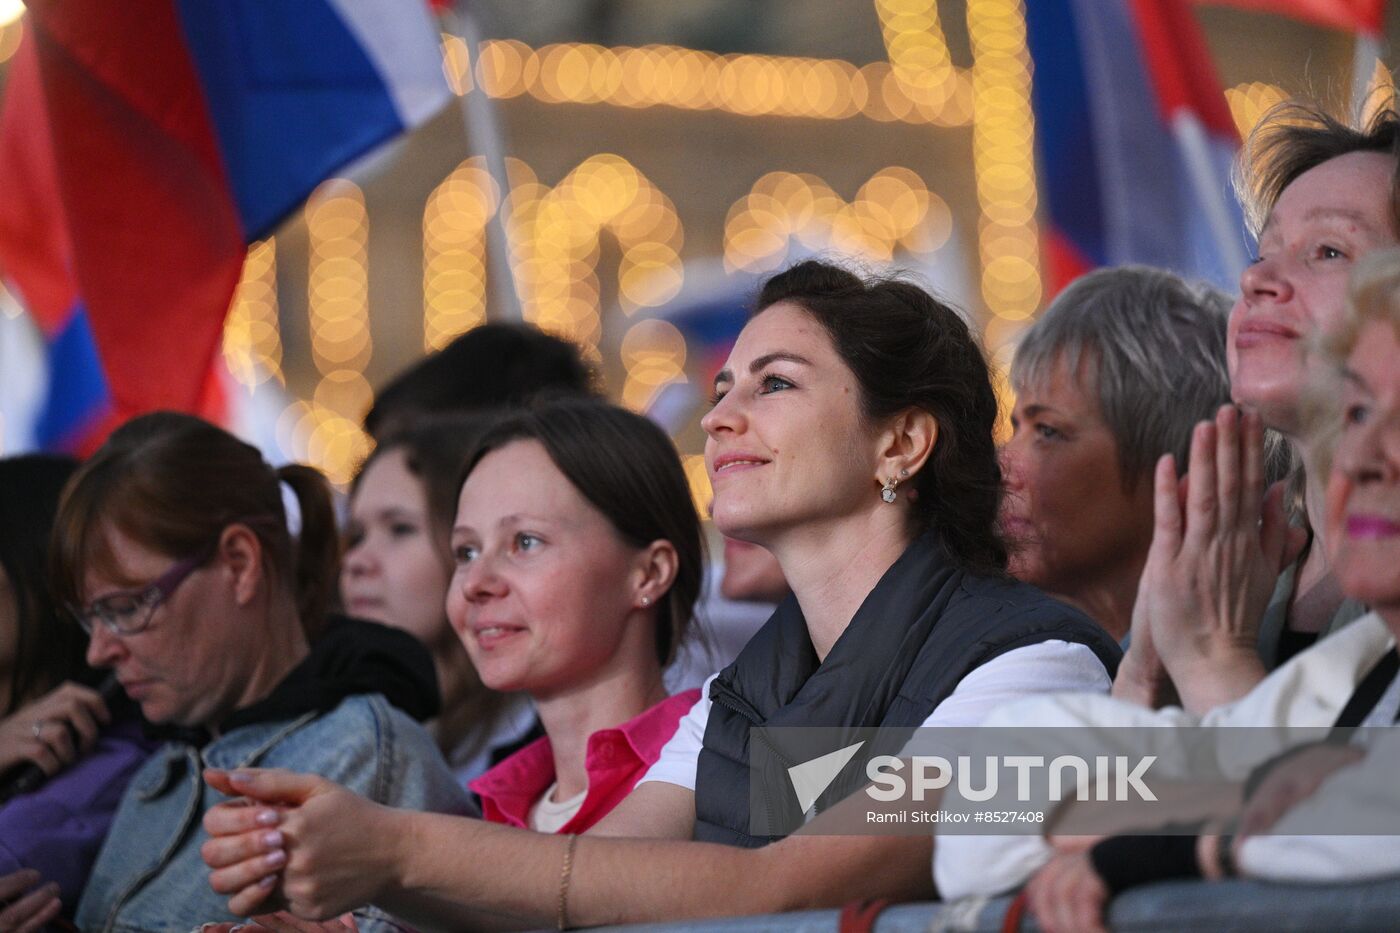 Russia New Regions Accession Day Concert